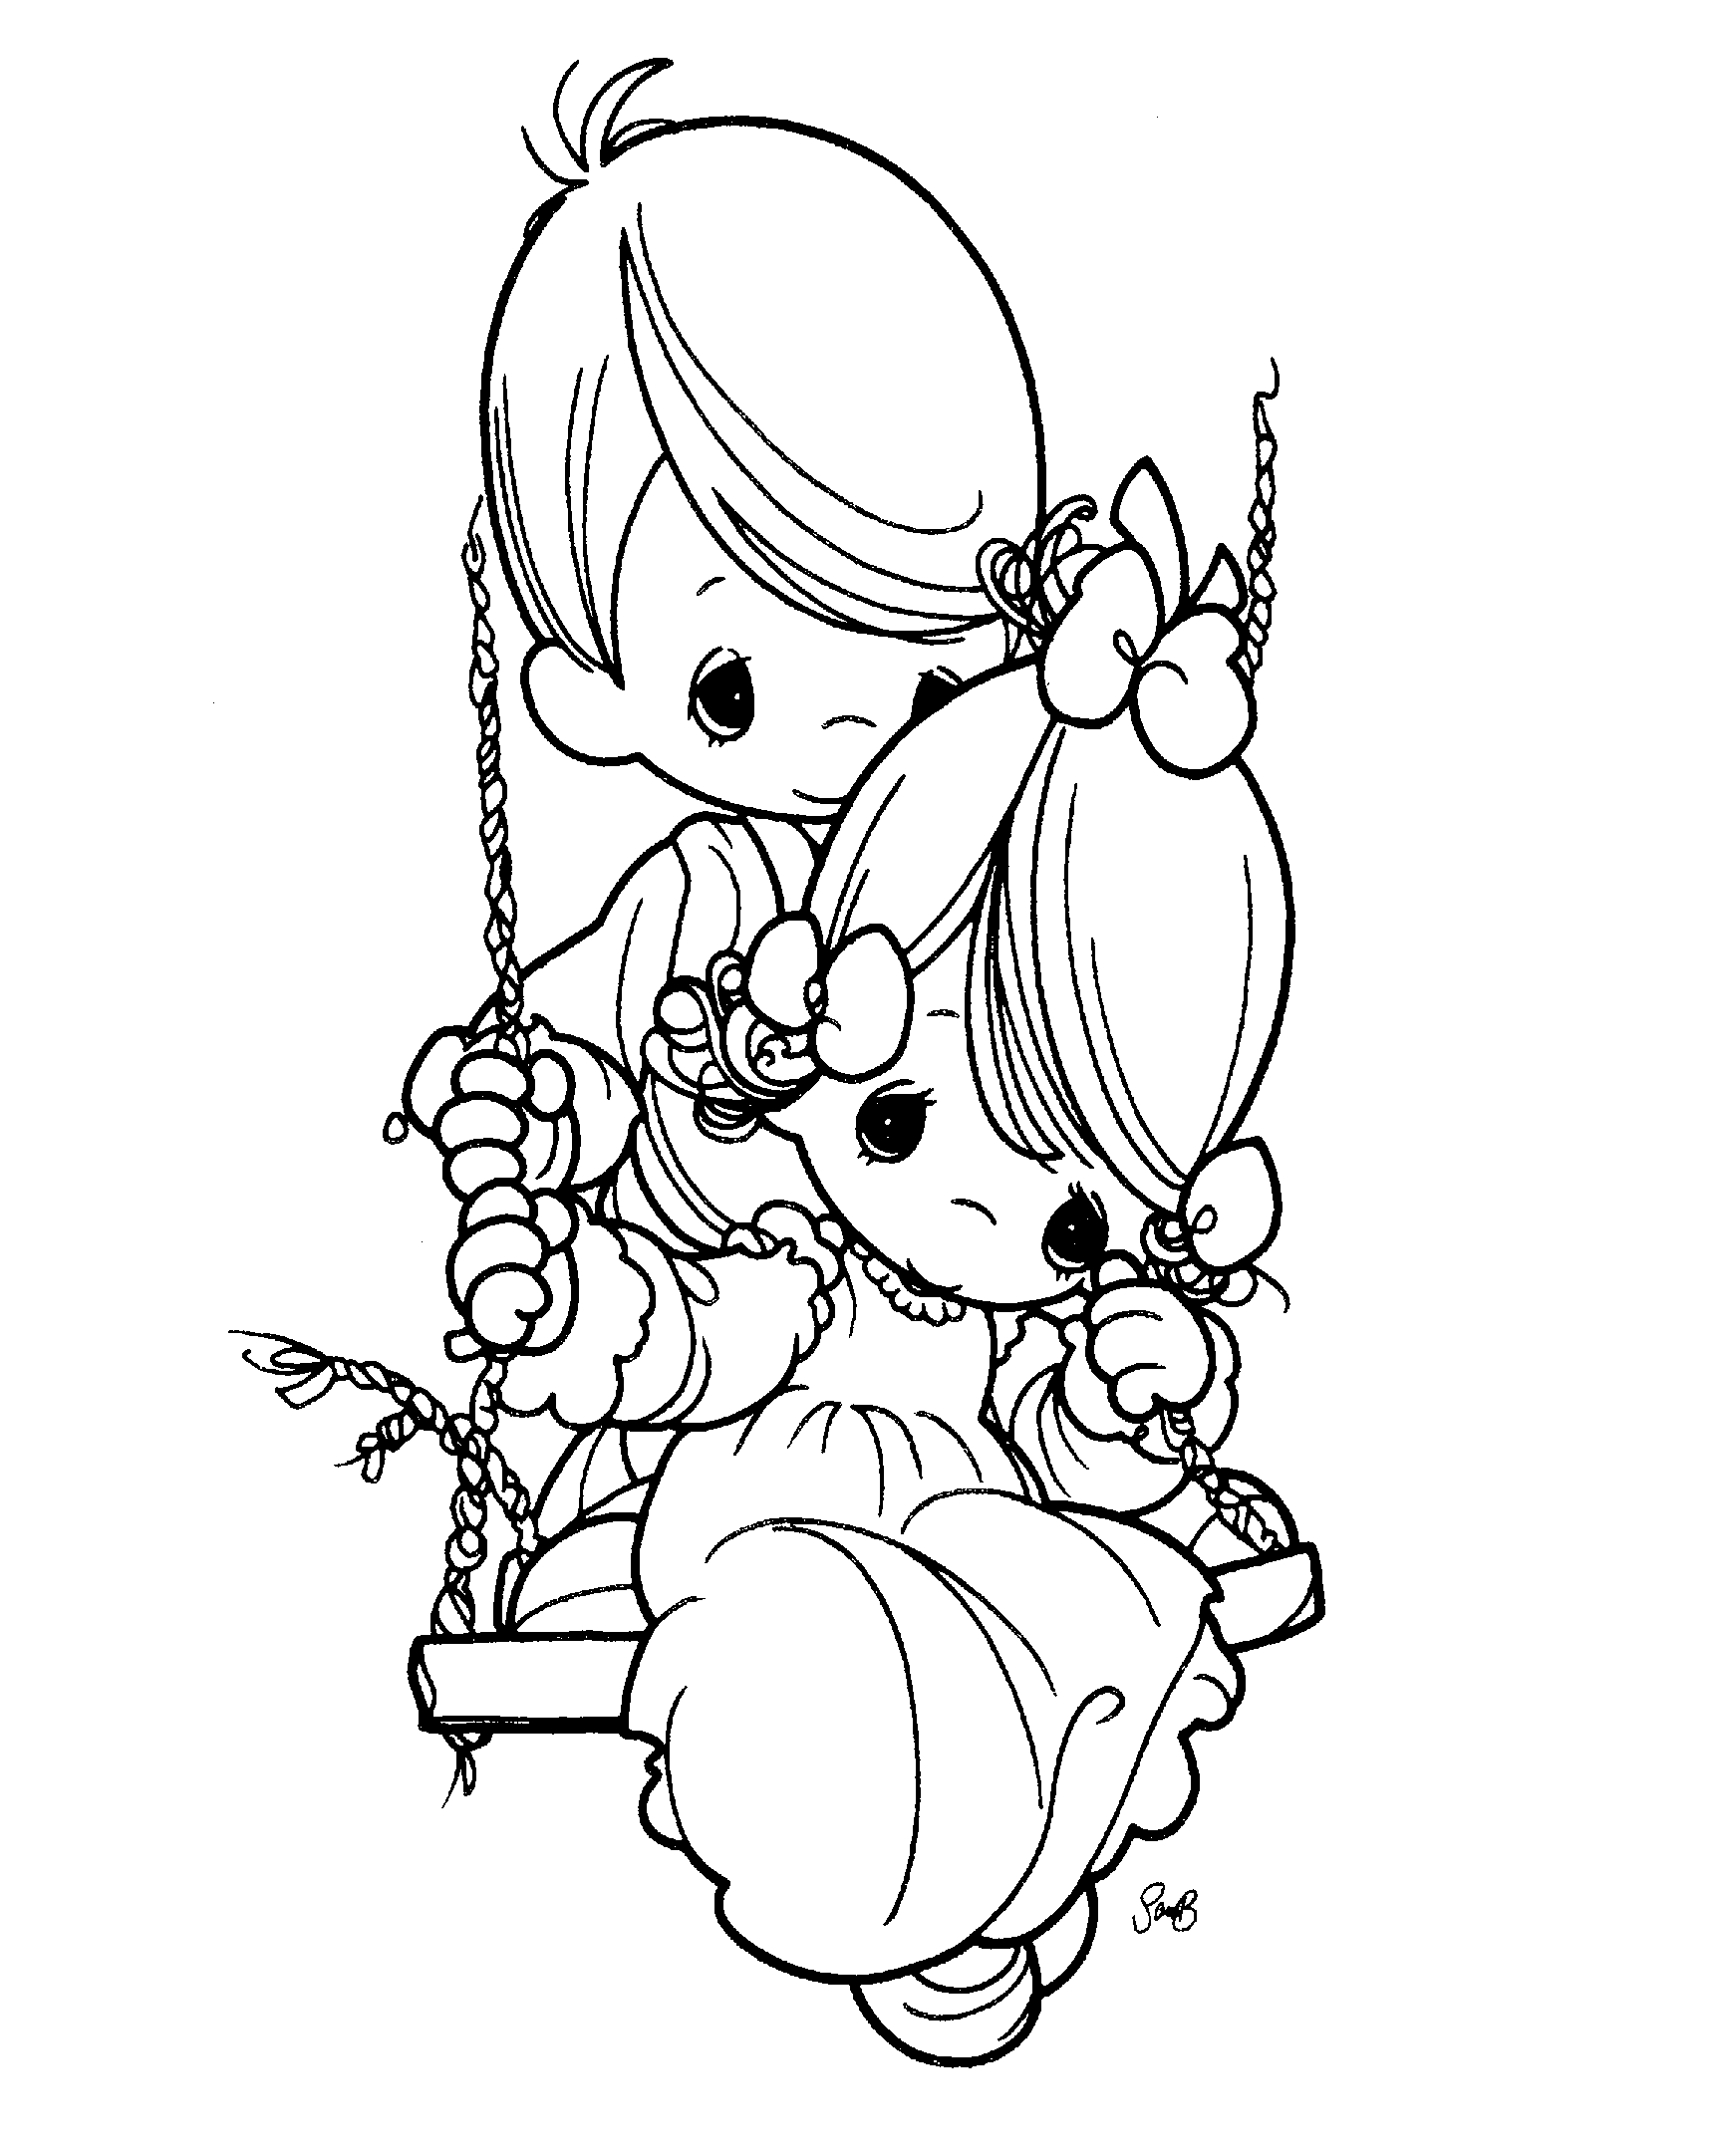 Little Boy And Little Girl Playing Swing Coloring Page - Free Printable Coloring  Pages for Kids